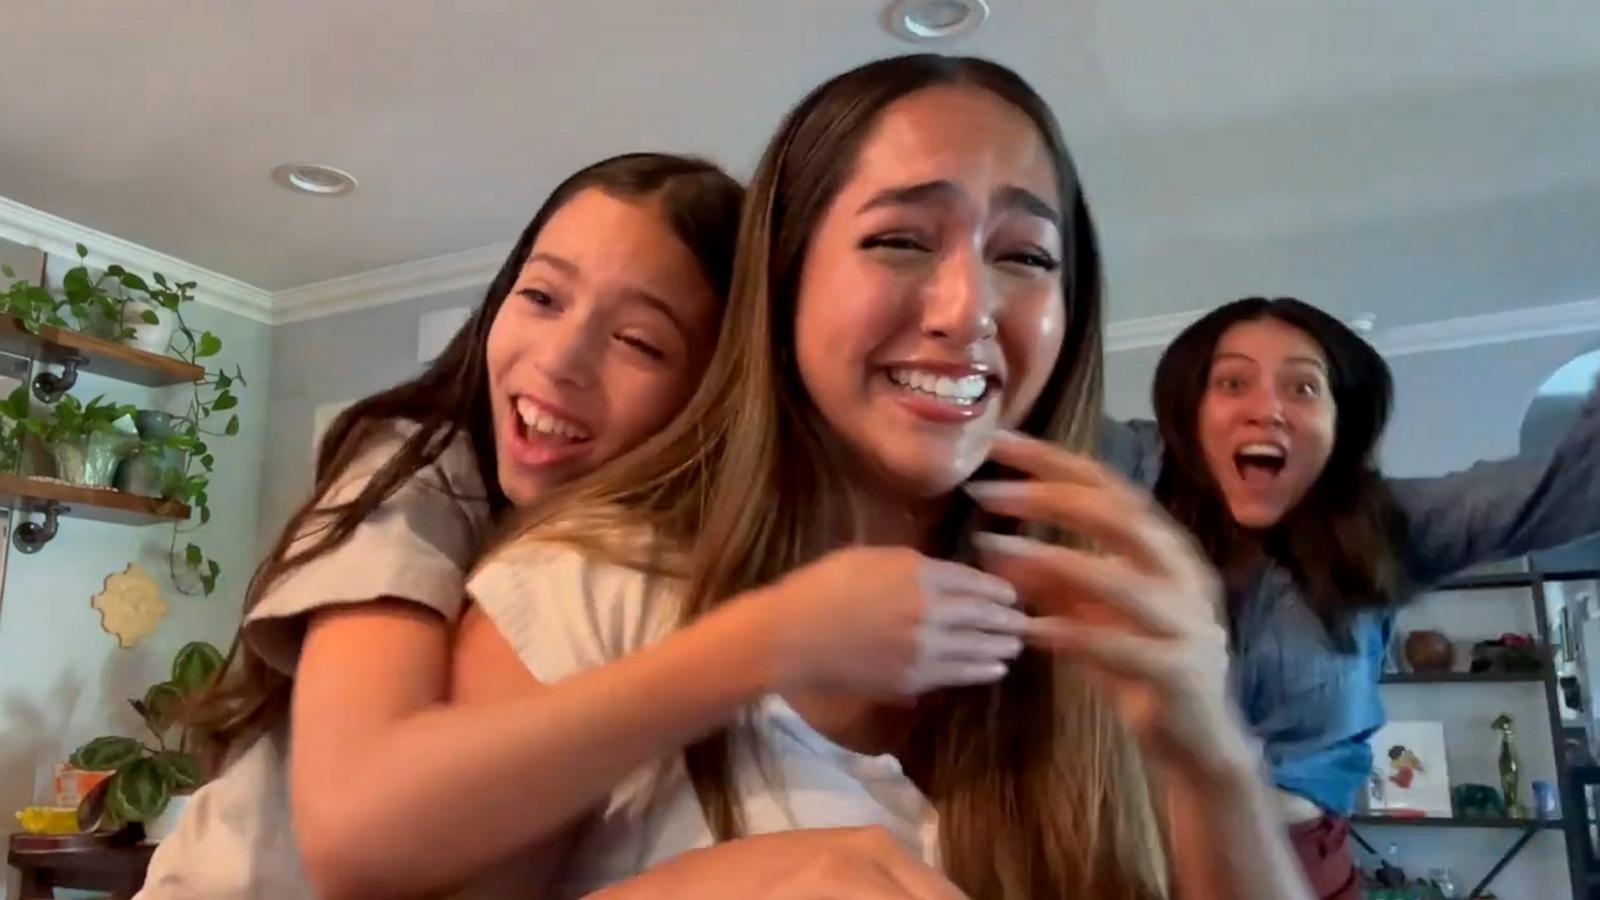 VIDEO: California teen celebrates Yale acceptance with family